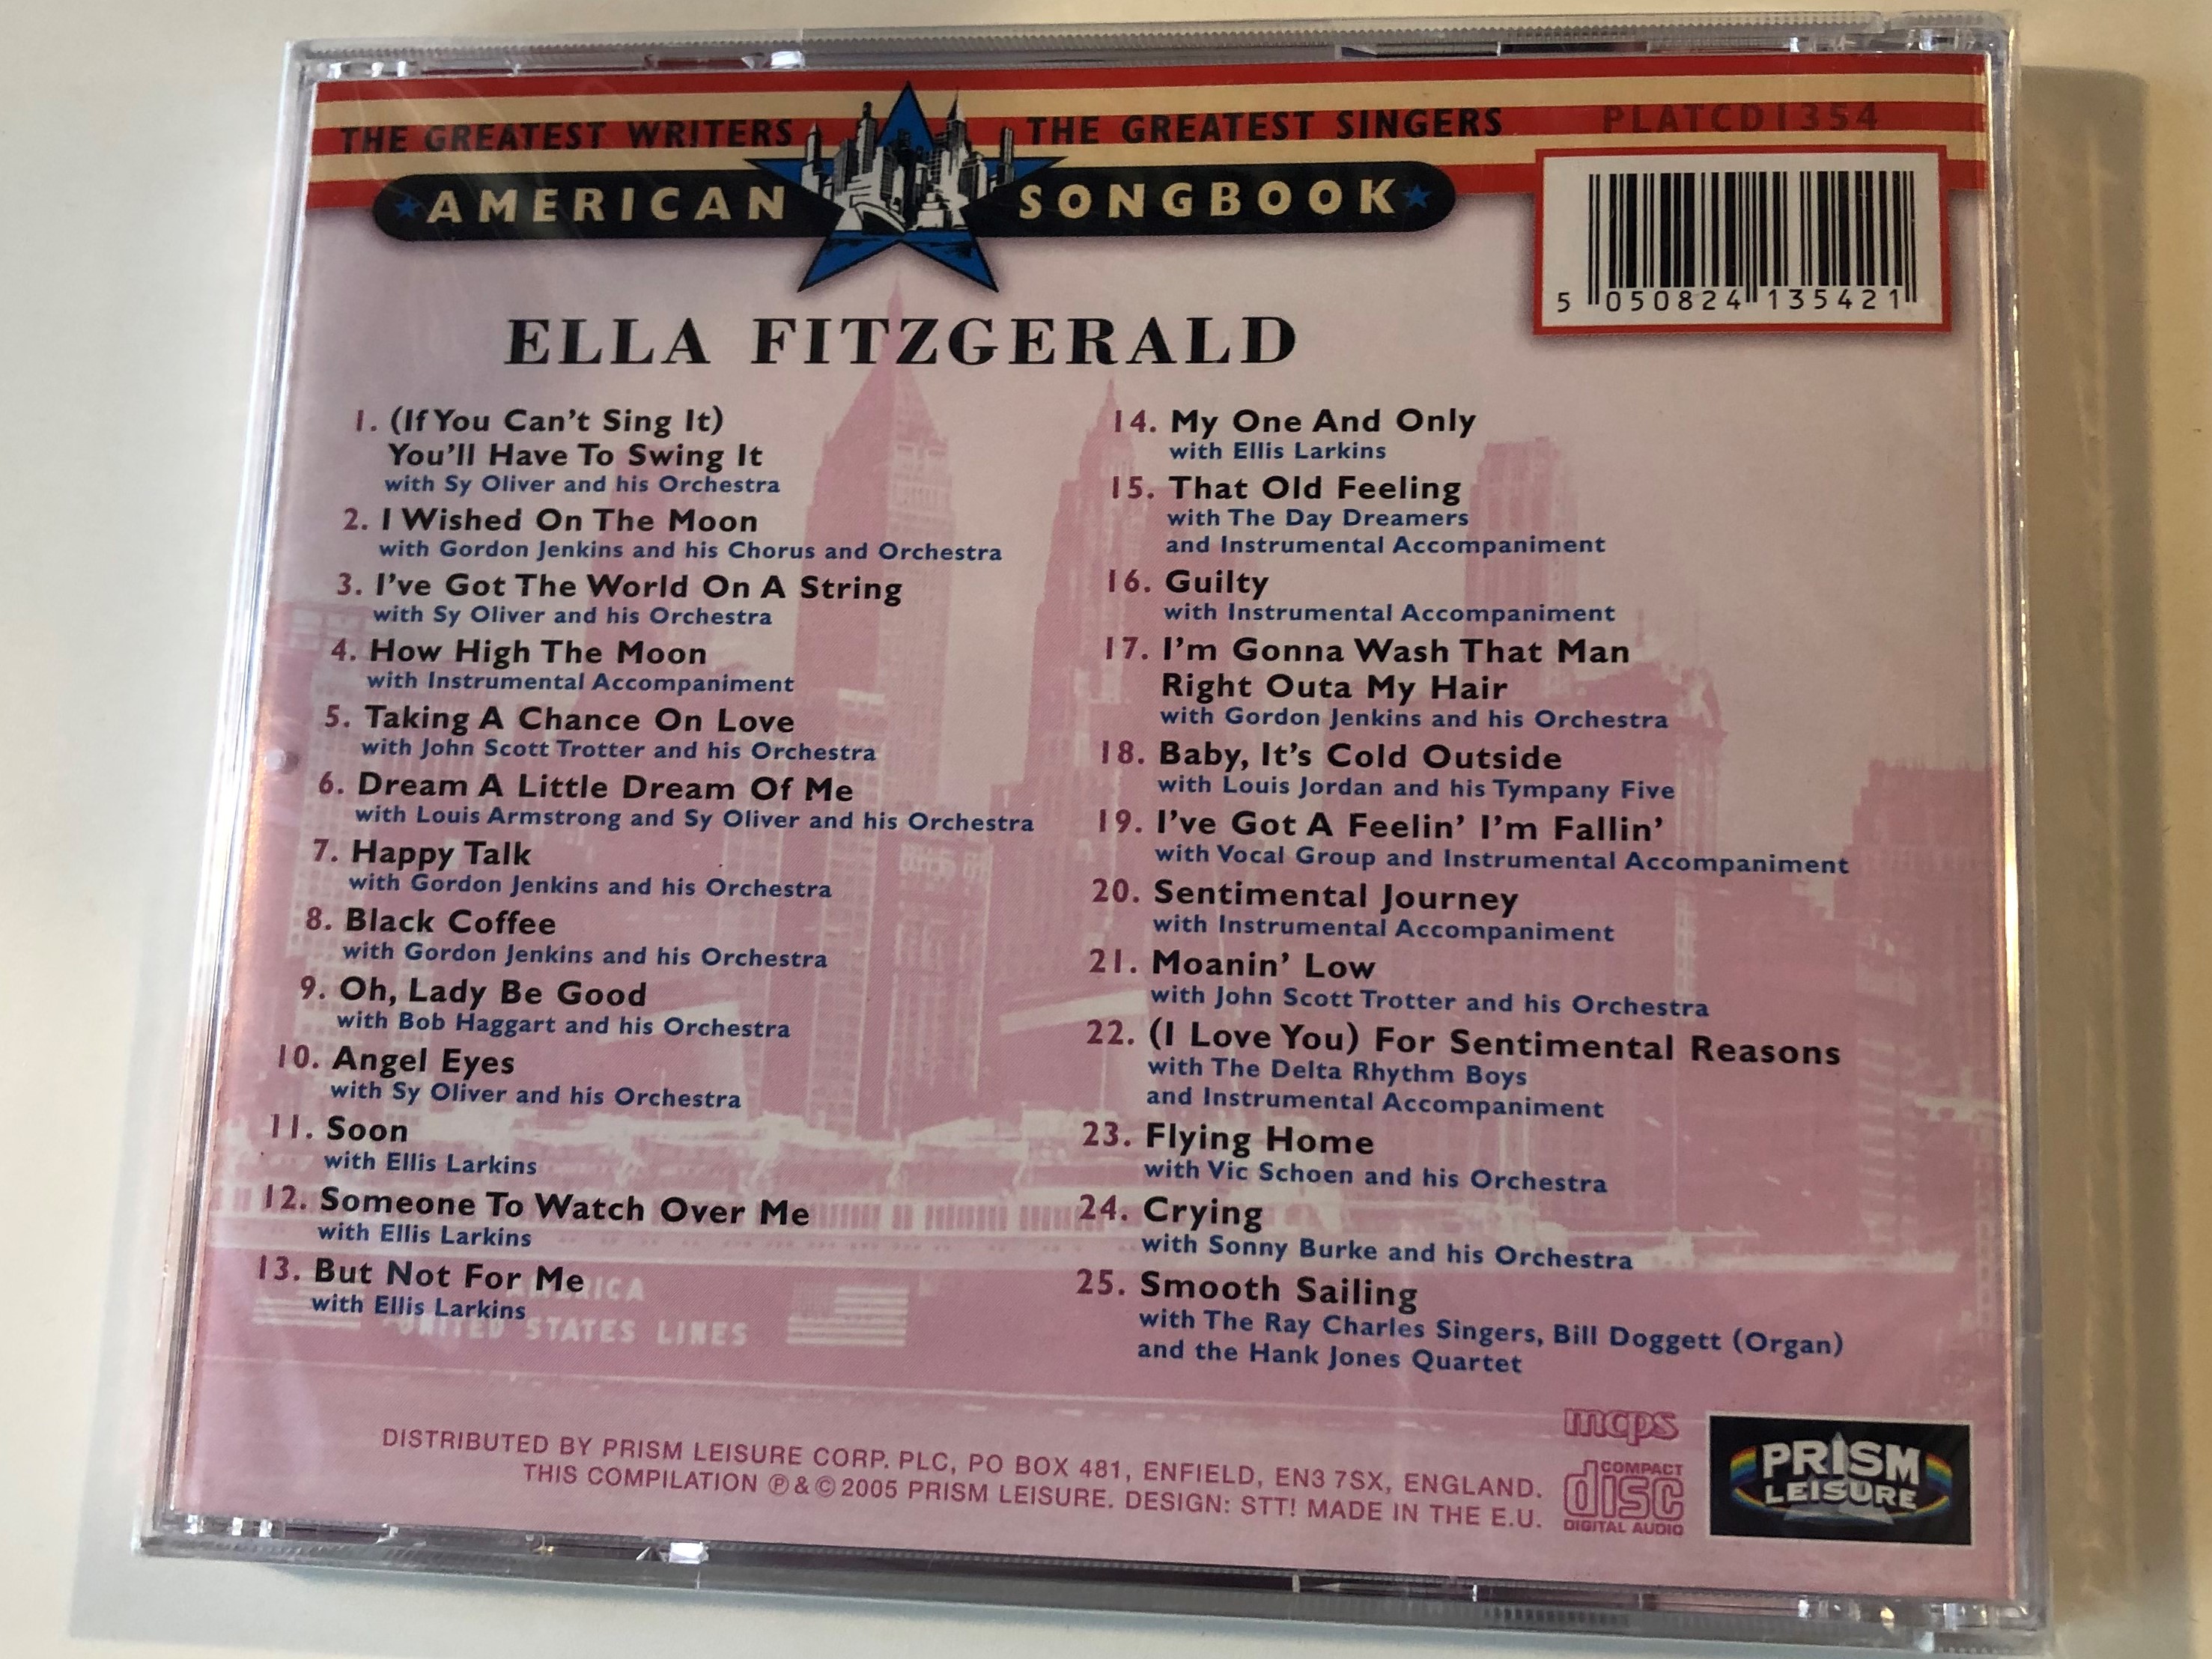 the-greatest-writers-the-greatest-singers-american-songbook-ella-fitzgerald-featuring-happy-talk-sentimental-journey-i-wished-on-the-moon-angel-eyes-dream-a-little-dream-of-me-pris.jpg